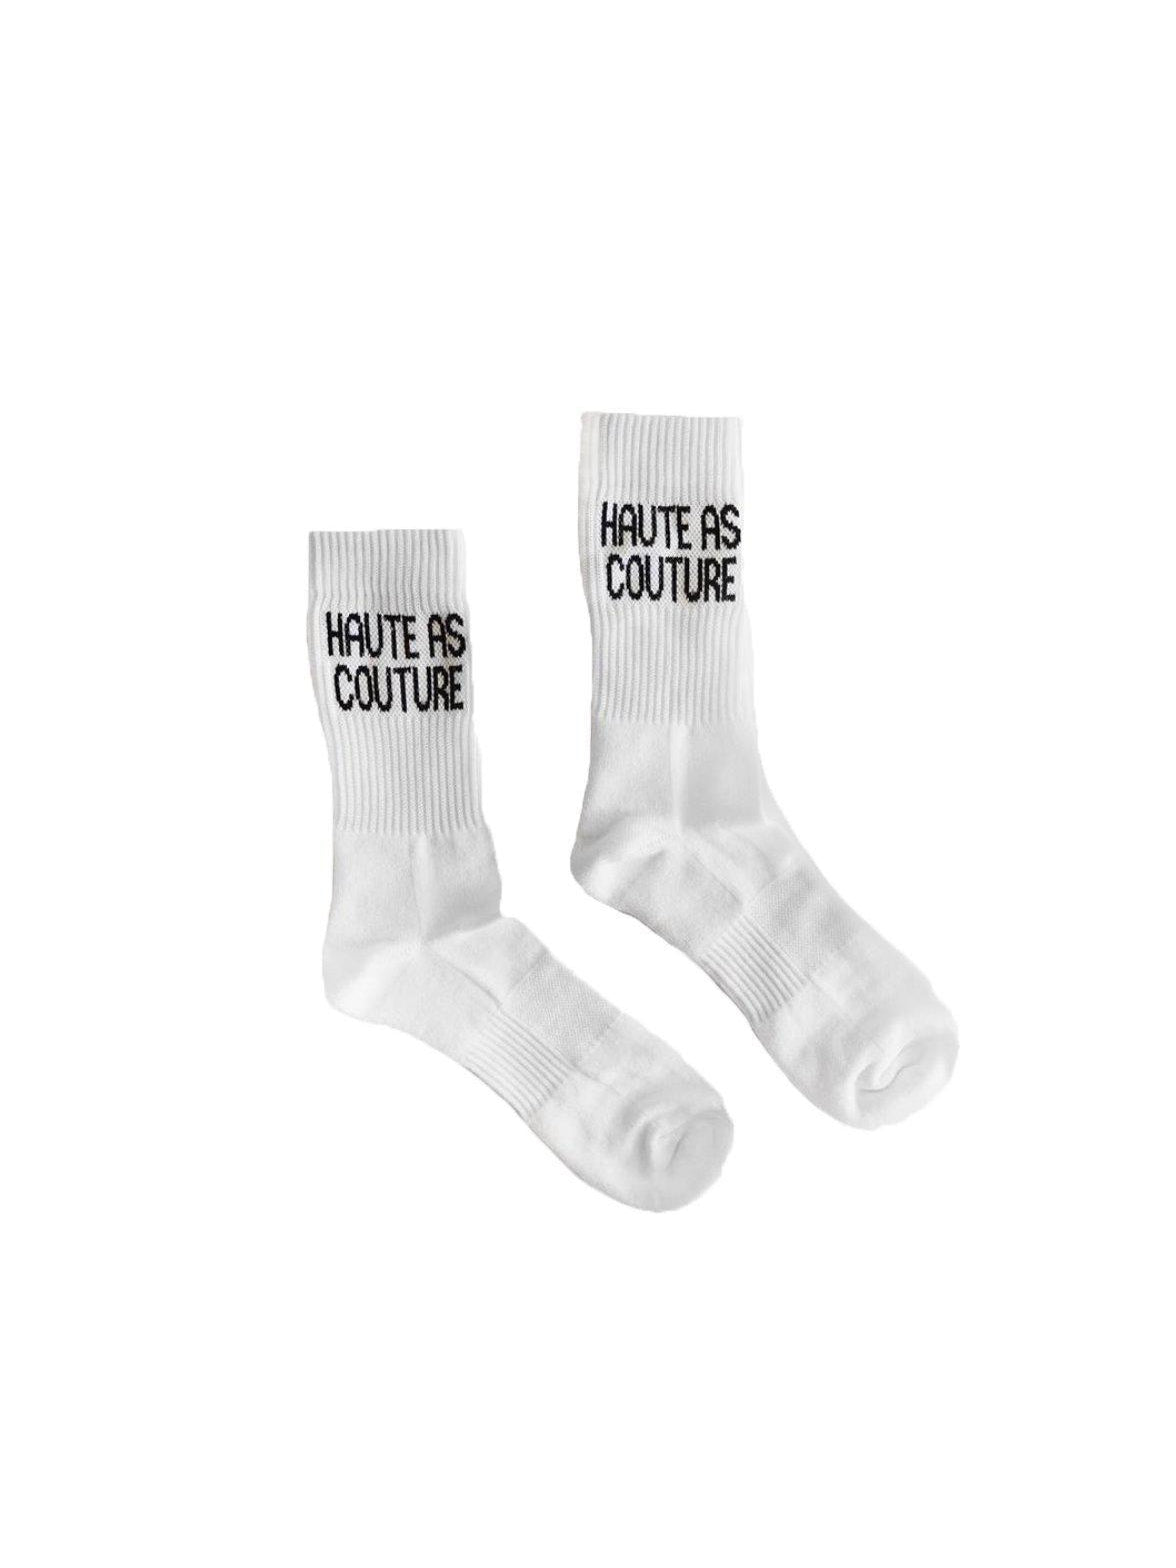 HAUTE AS COUTURE socks